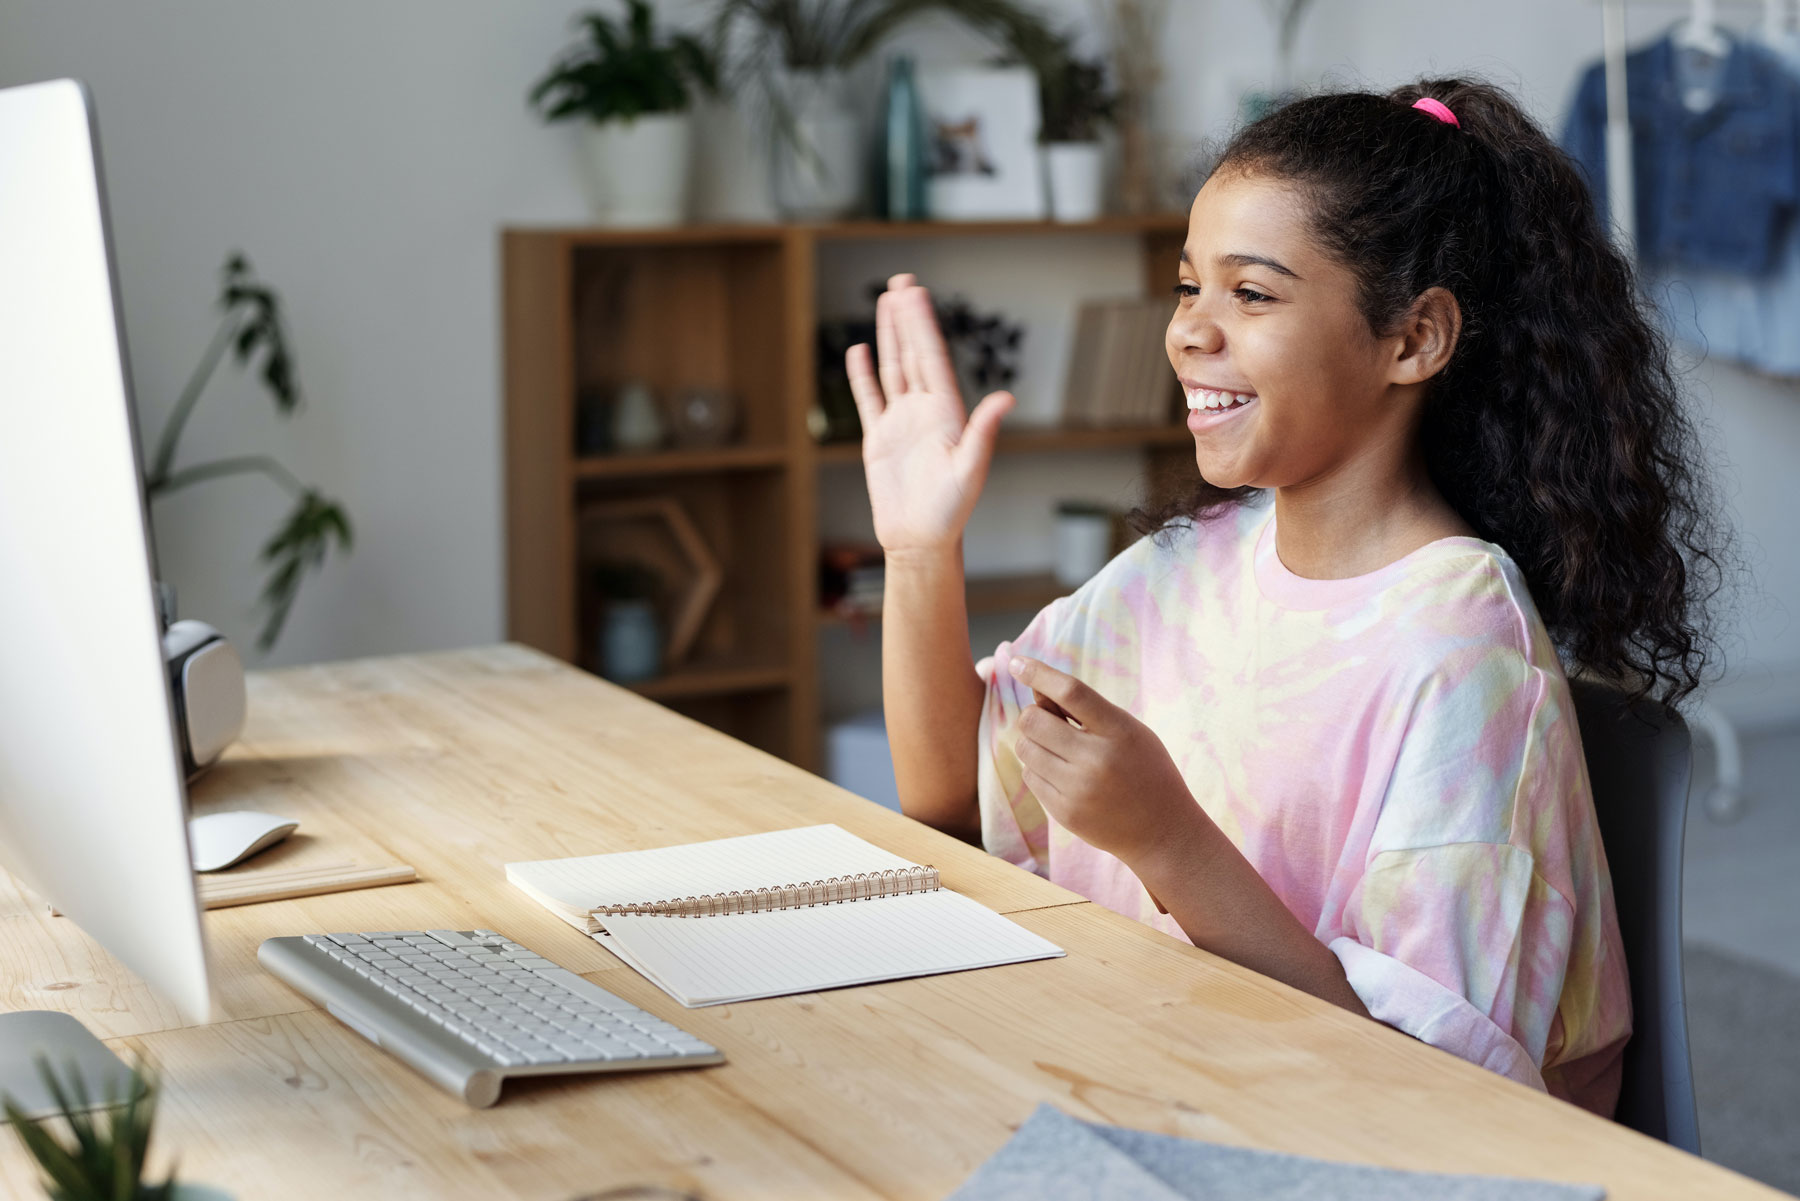 Girl participating in an online course